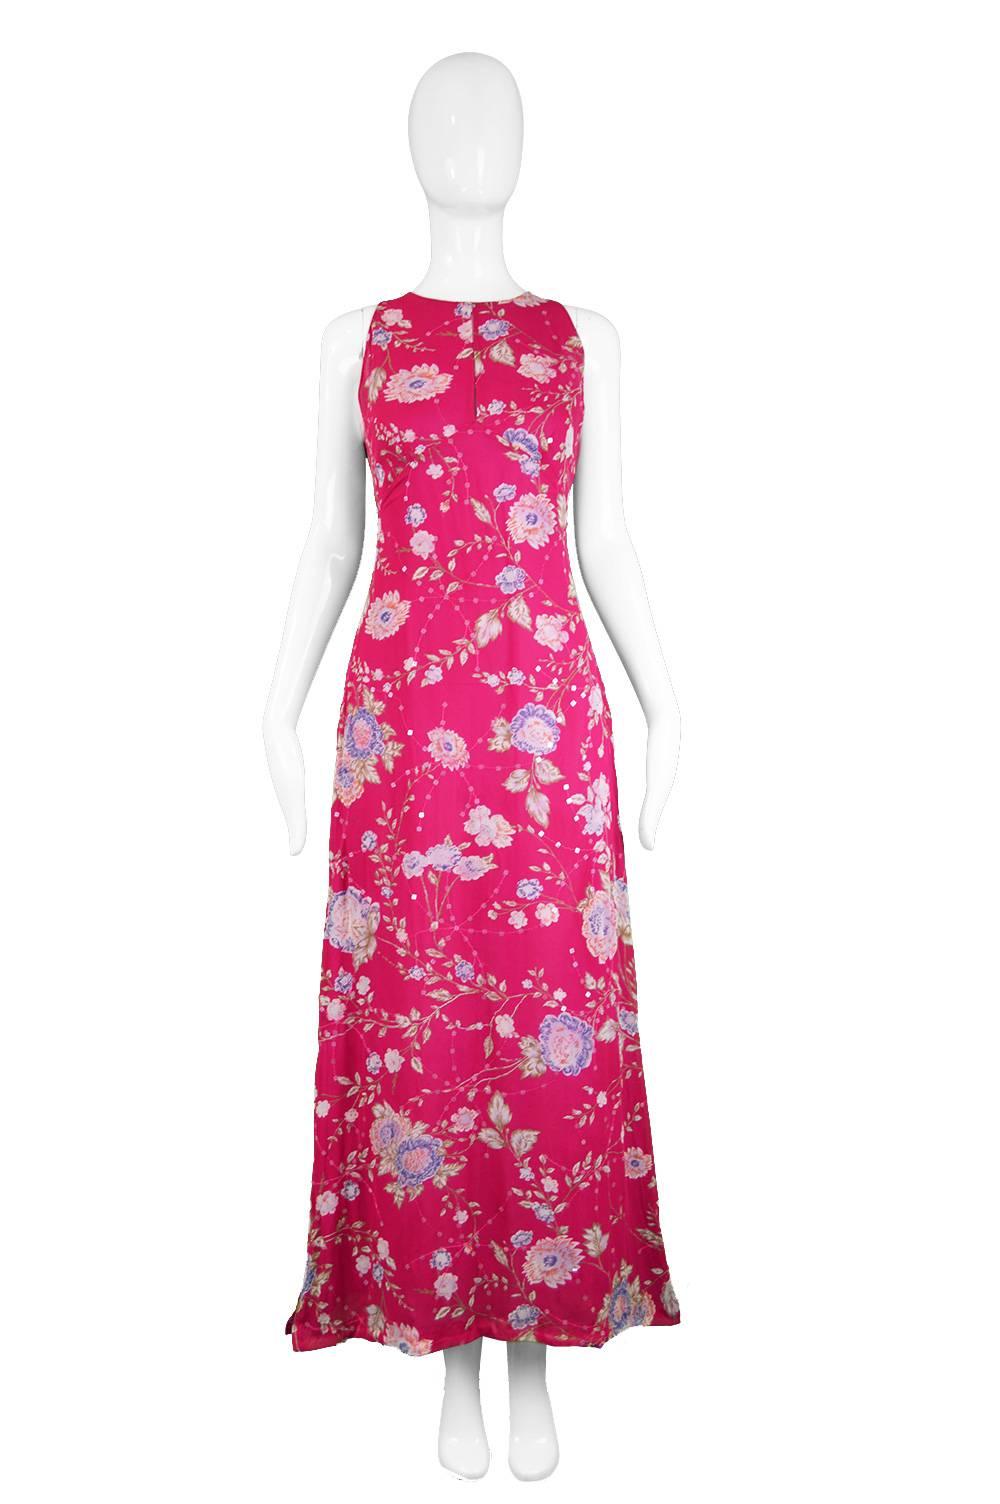 An elegant and feminine vintage maxi dress from the 1990s in a fuschia pink silk with an Asian/ Chinese style floral print throughout. Perfect for day or evening, this gorgeous sleeveless dress has a subtle keyhole at the bust to add a flash of